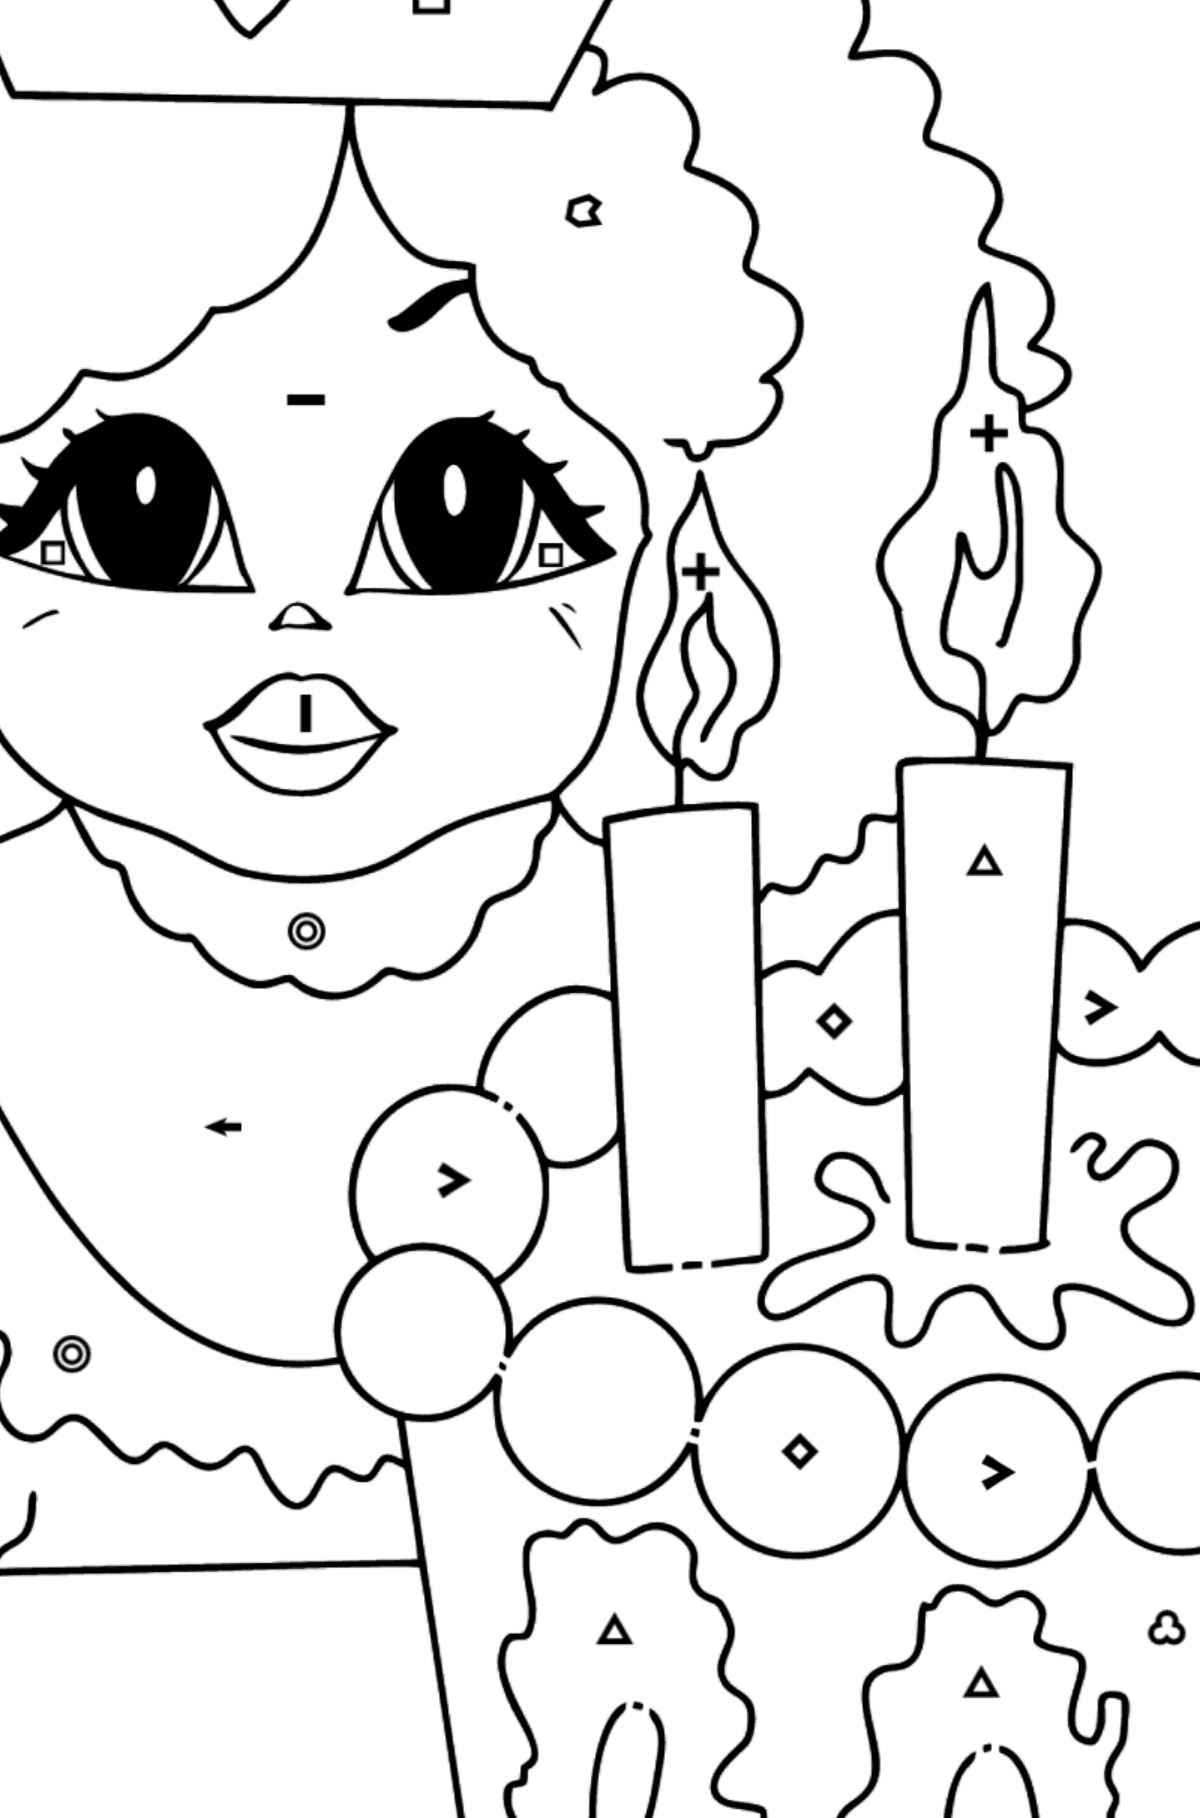 Coloring Picture - A Princess with Cake - Coloring by Symbols and Geometric Shapes for Kids